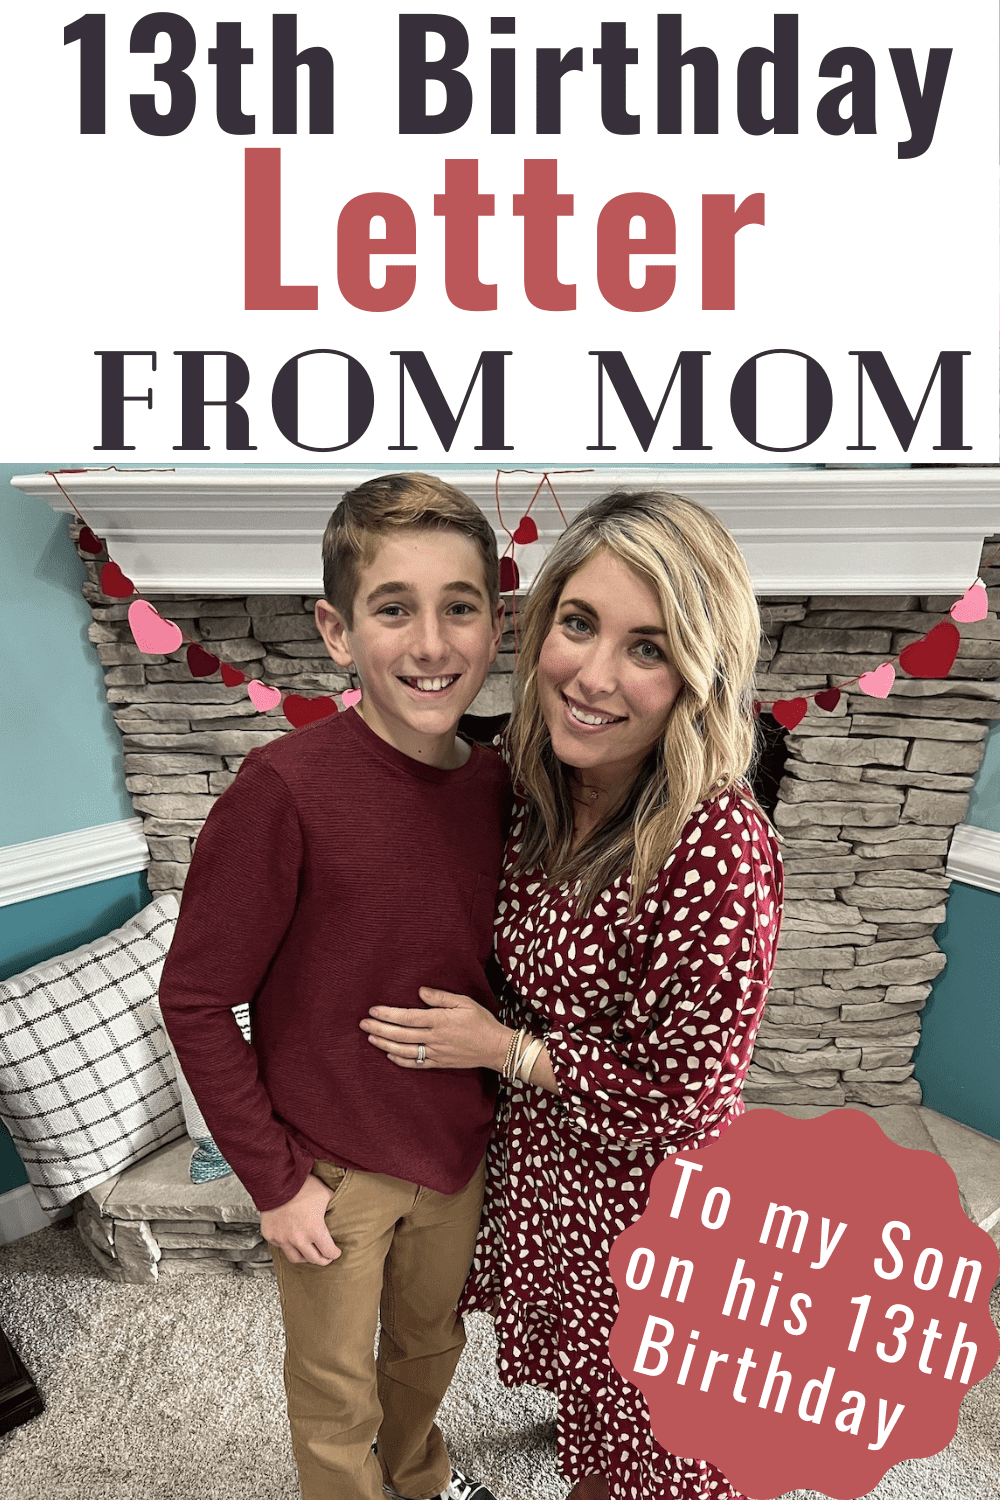 A letter to my son on his 13th birthday. A letter from mother to son as he turns 13 years old. A great birthday tradition! 